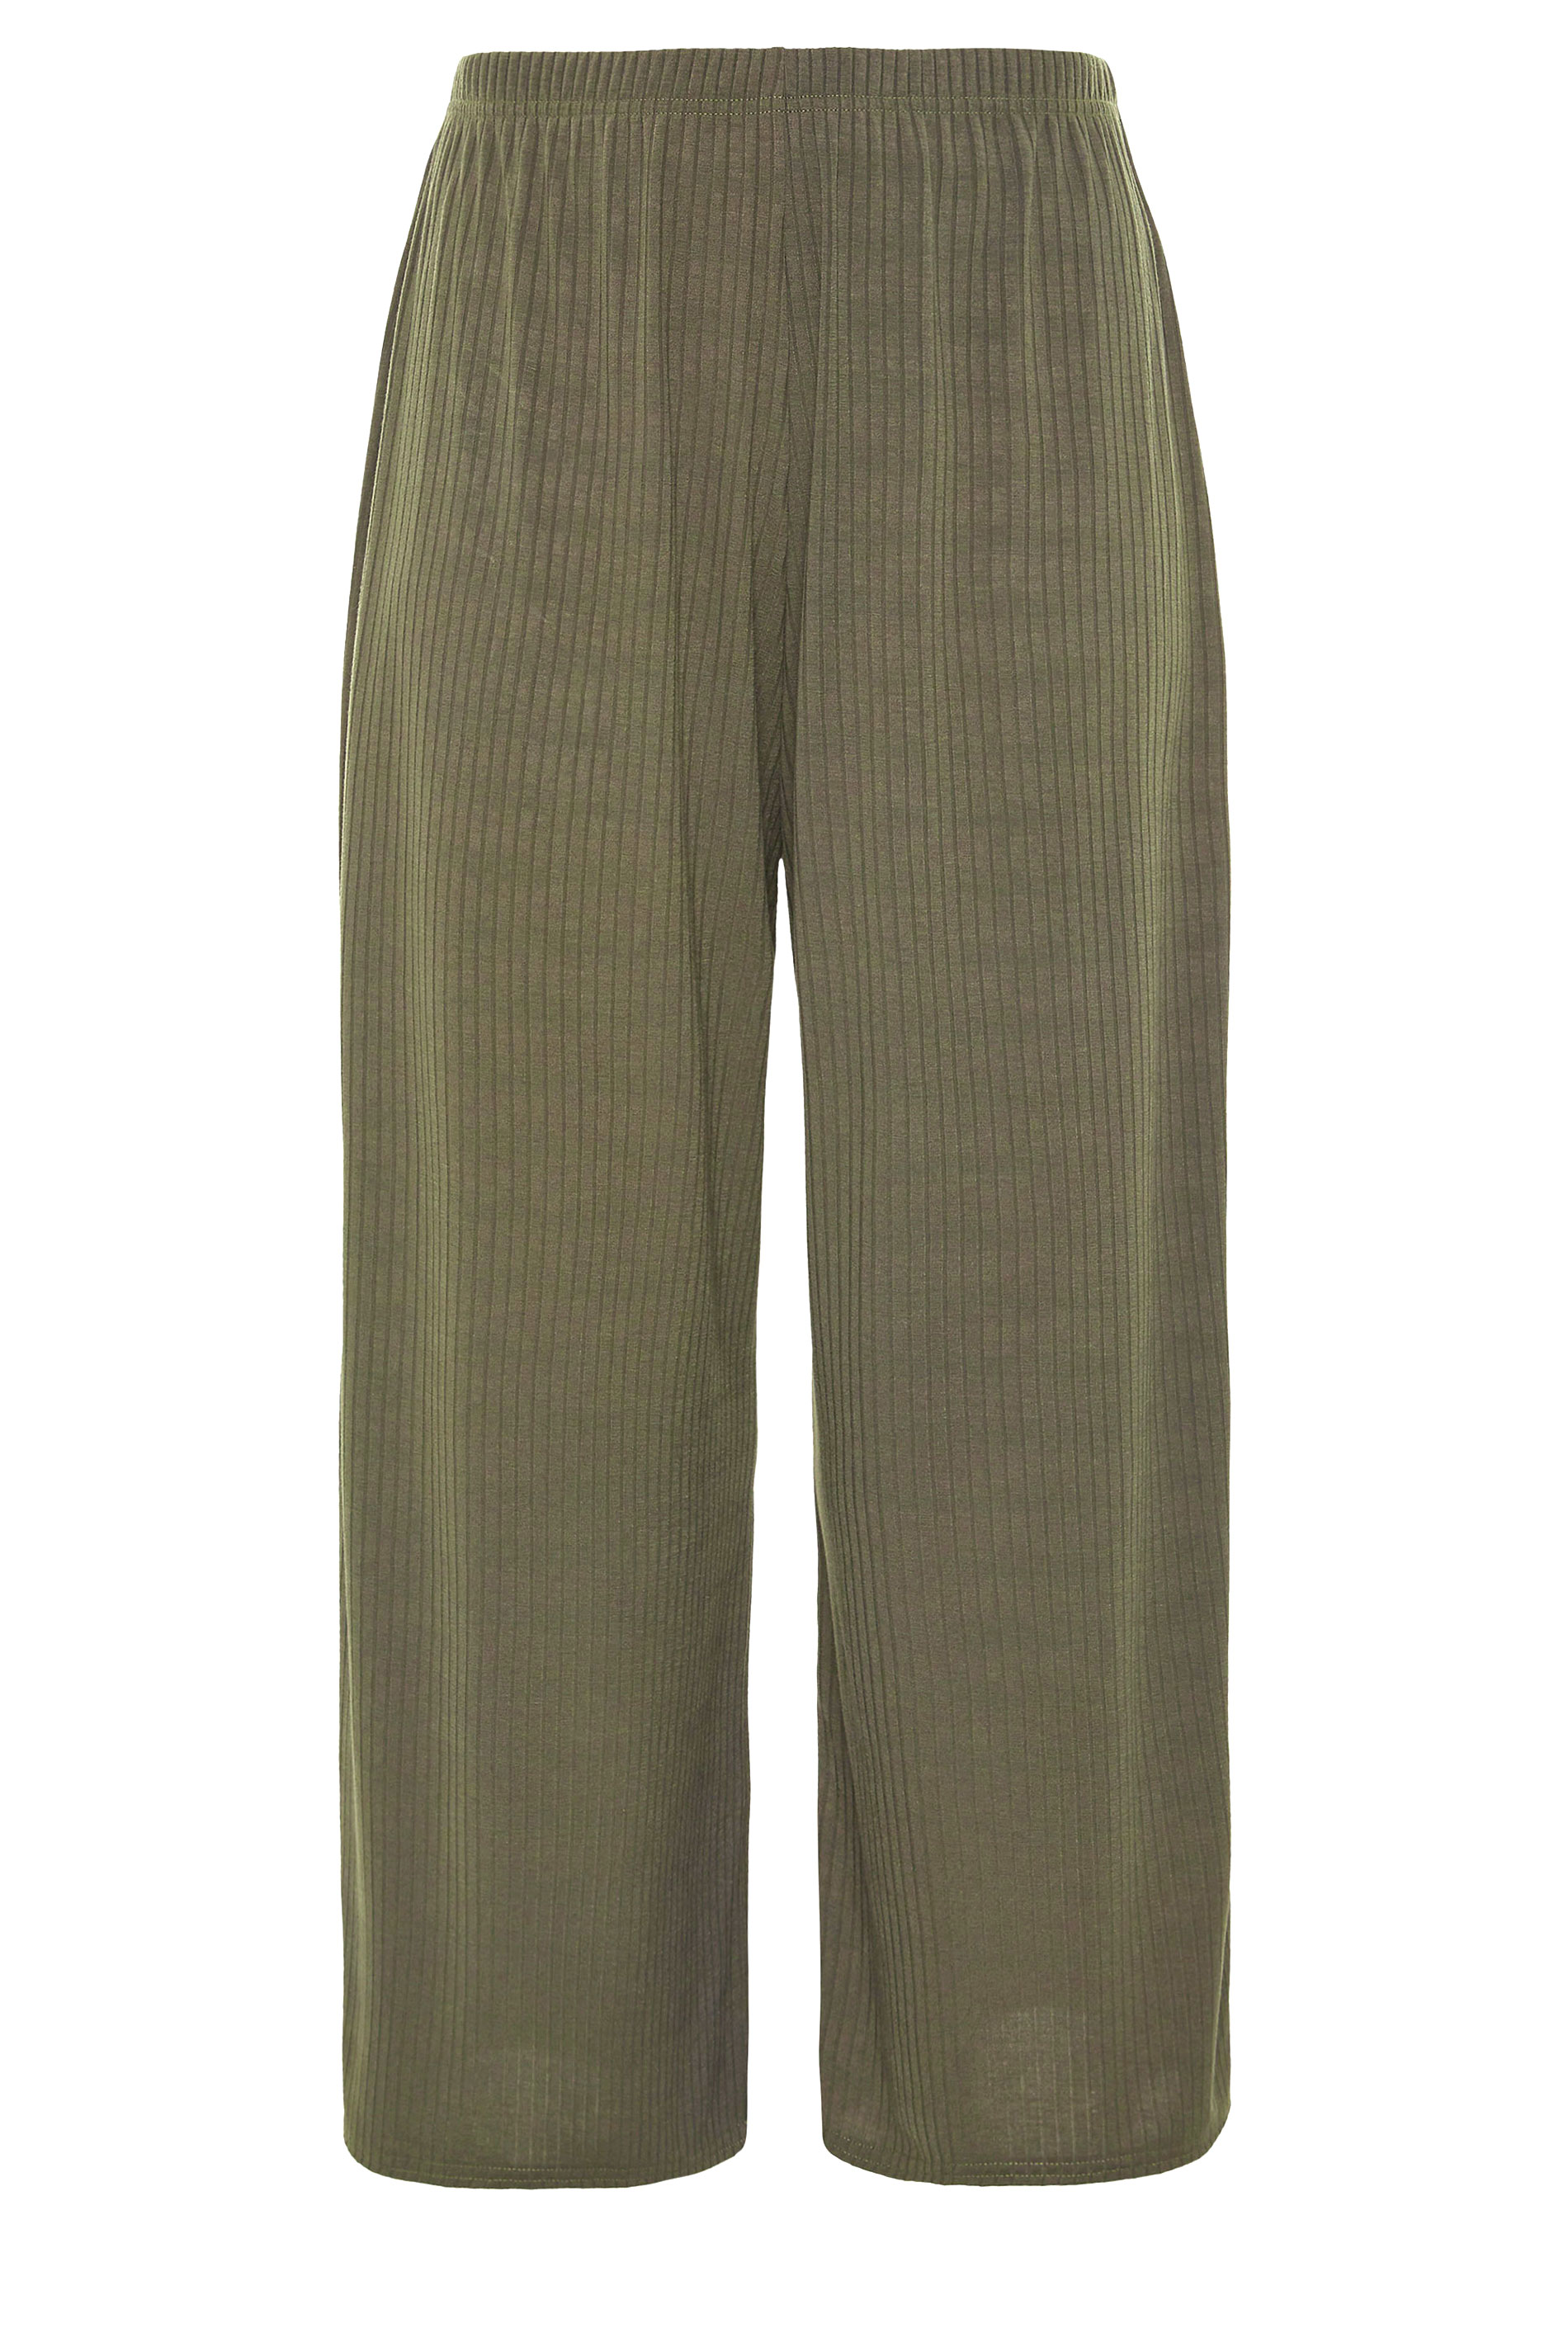 Plus Size LIMITED COLLECTION Khaki Ribbed Wide Leg Trousers | Yours ...